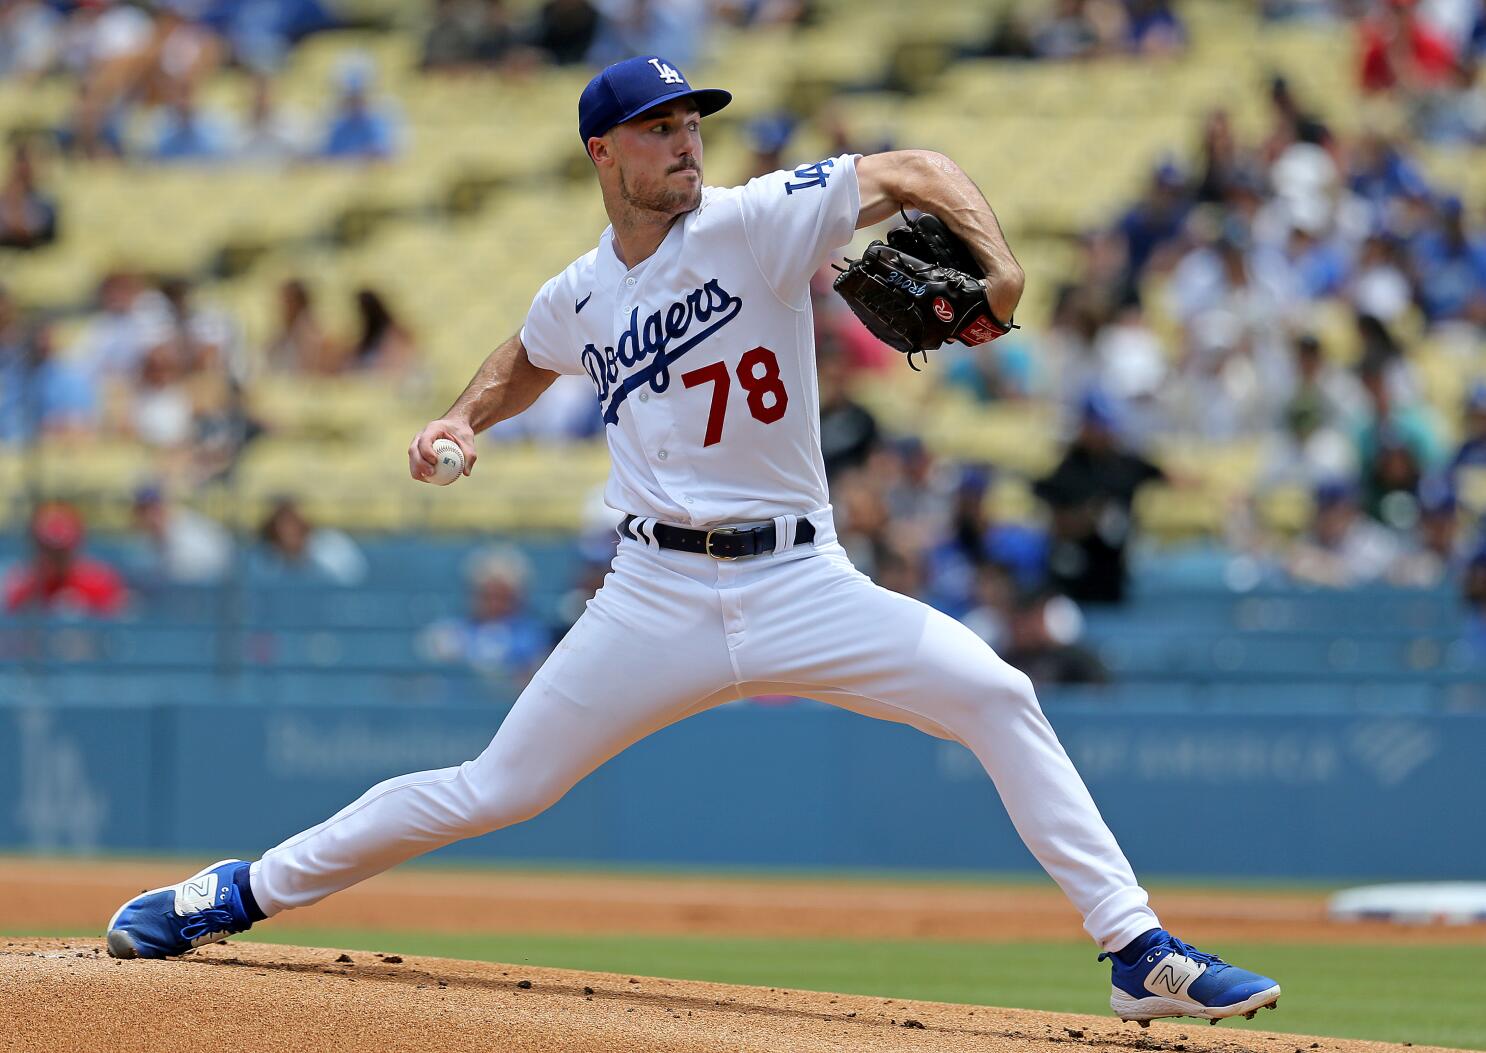 LOS ANGELES, CA - JULY 29: Los Angeles Dodgers starting pitcher